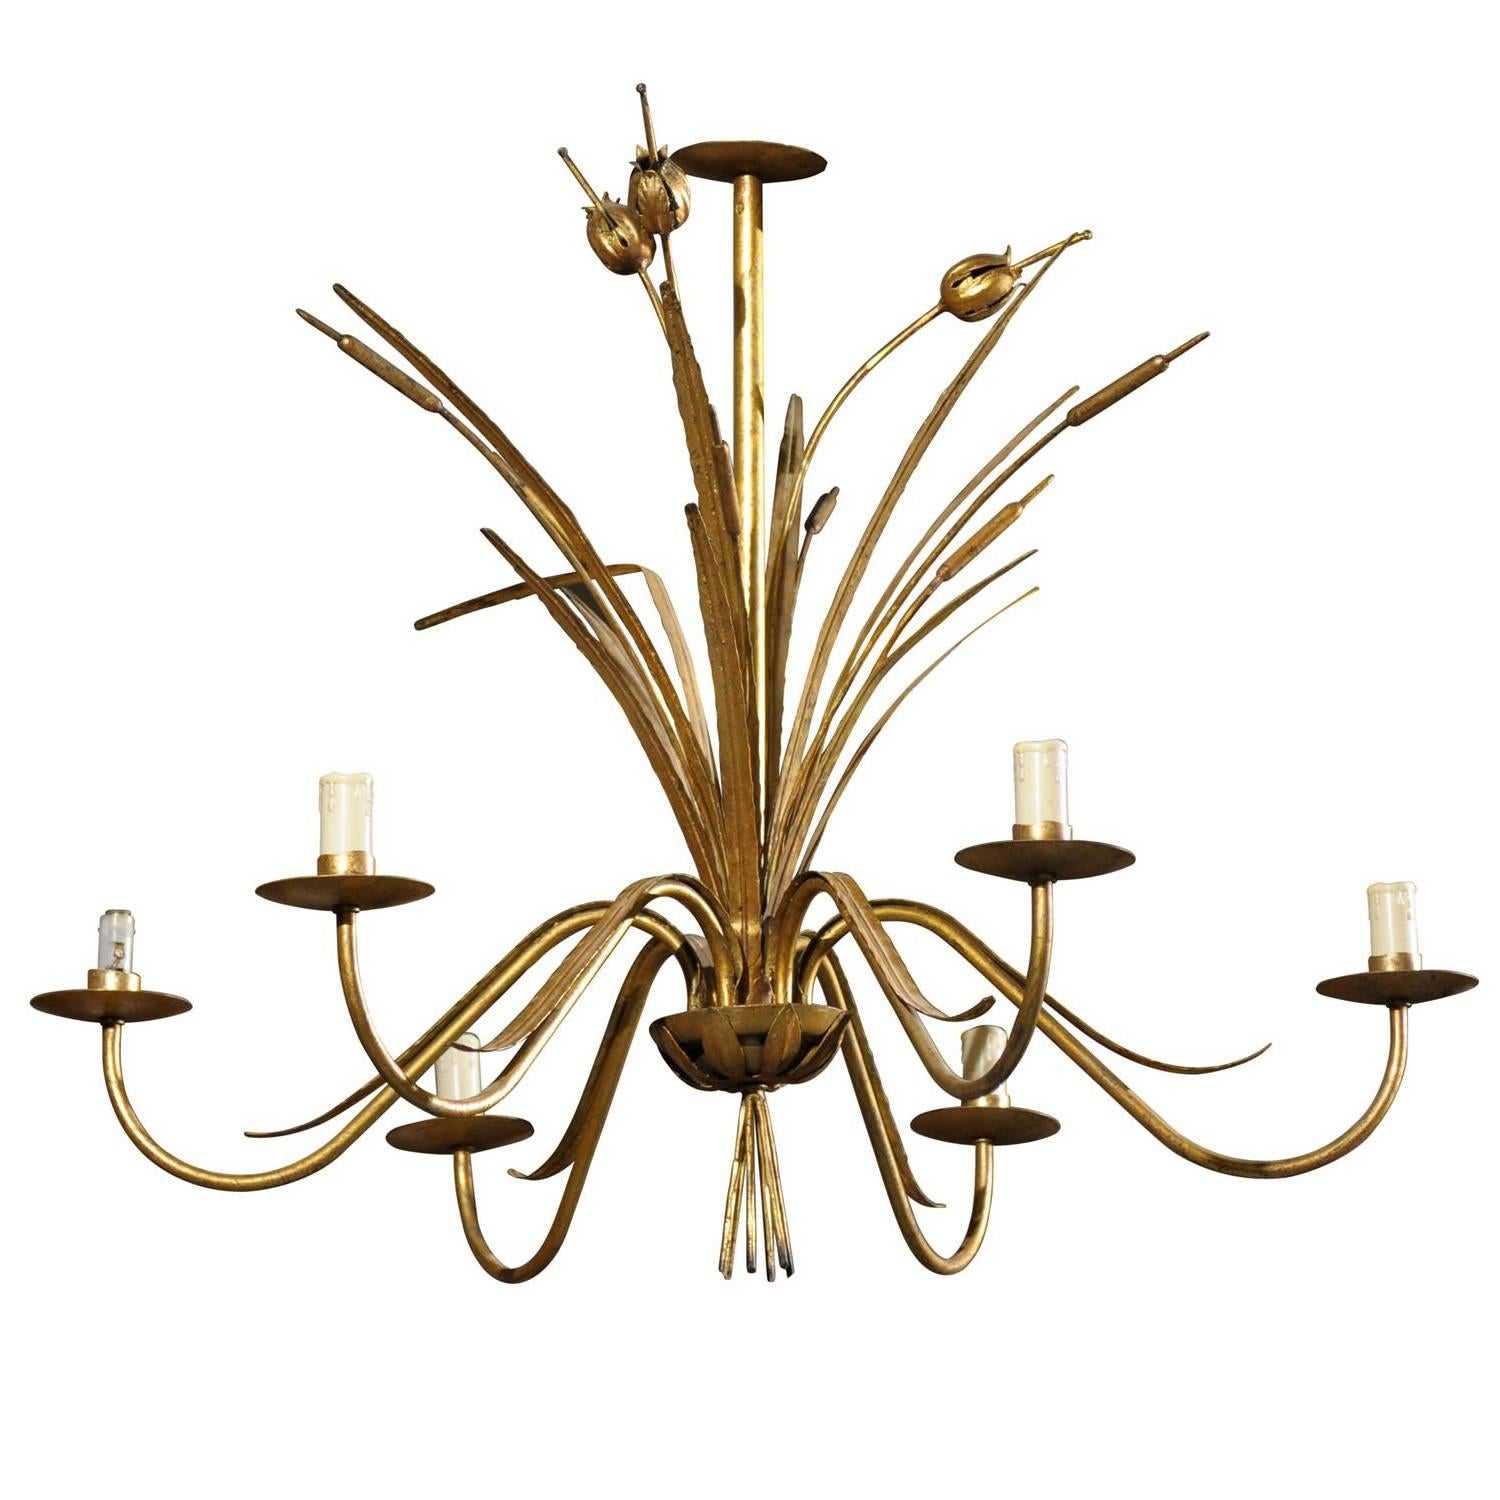 Mid-Century Six Light Gilded Chandelier from France, circa 1950